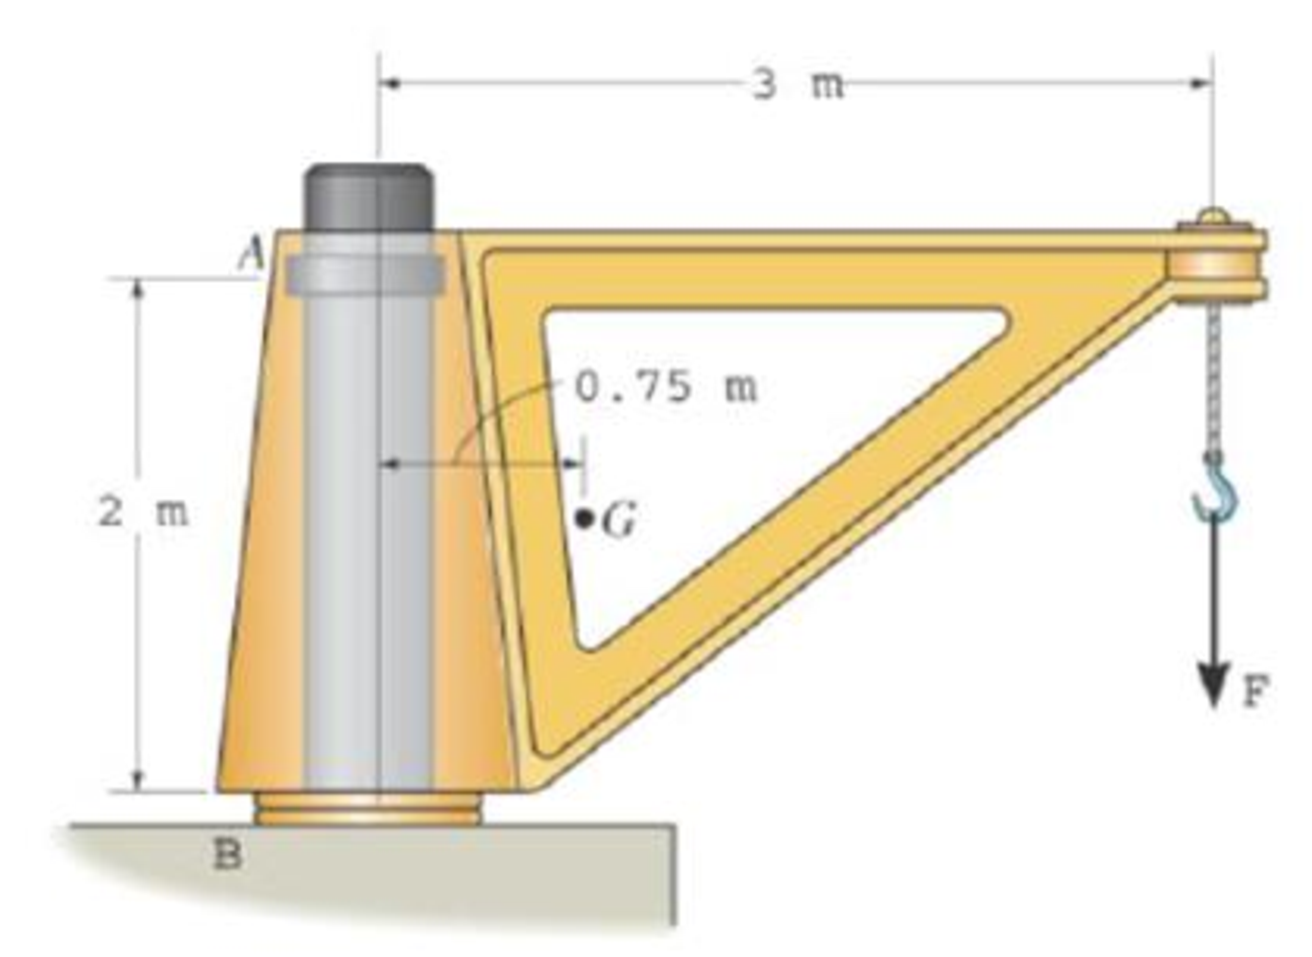 Chapter 5.4, Problem 33P, The dimensions of a jib crane, which is manufactured by the Basick Co., are given in the figure. If 